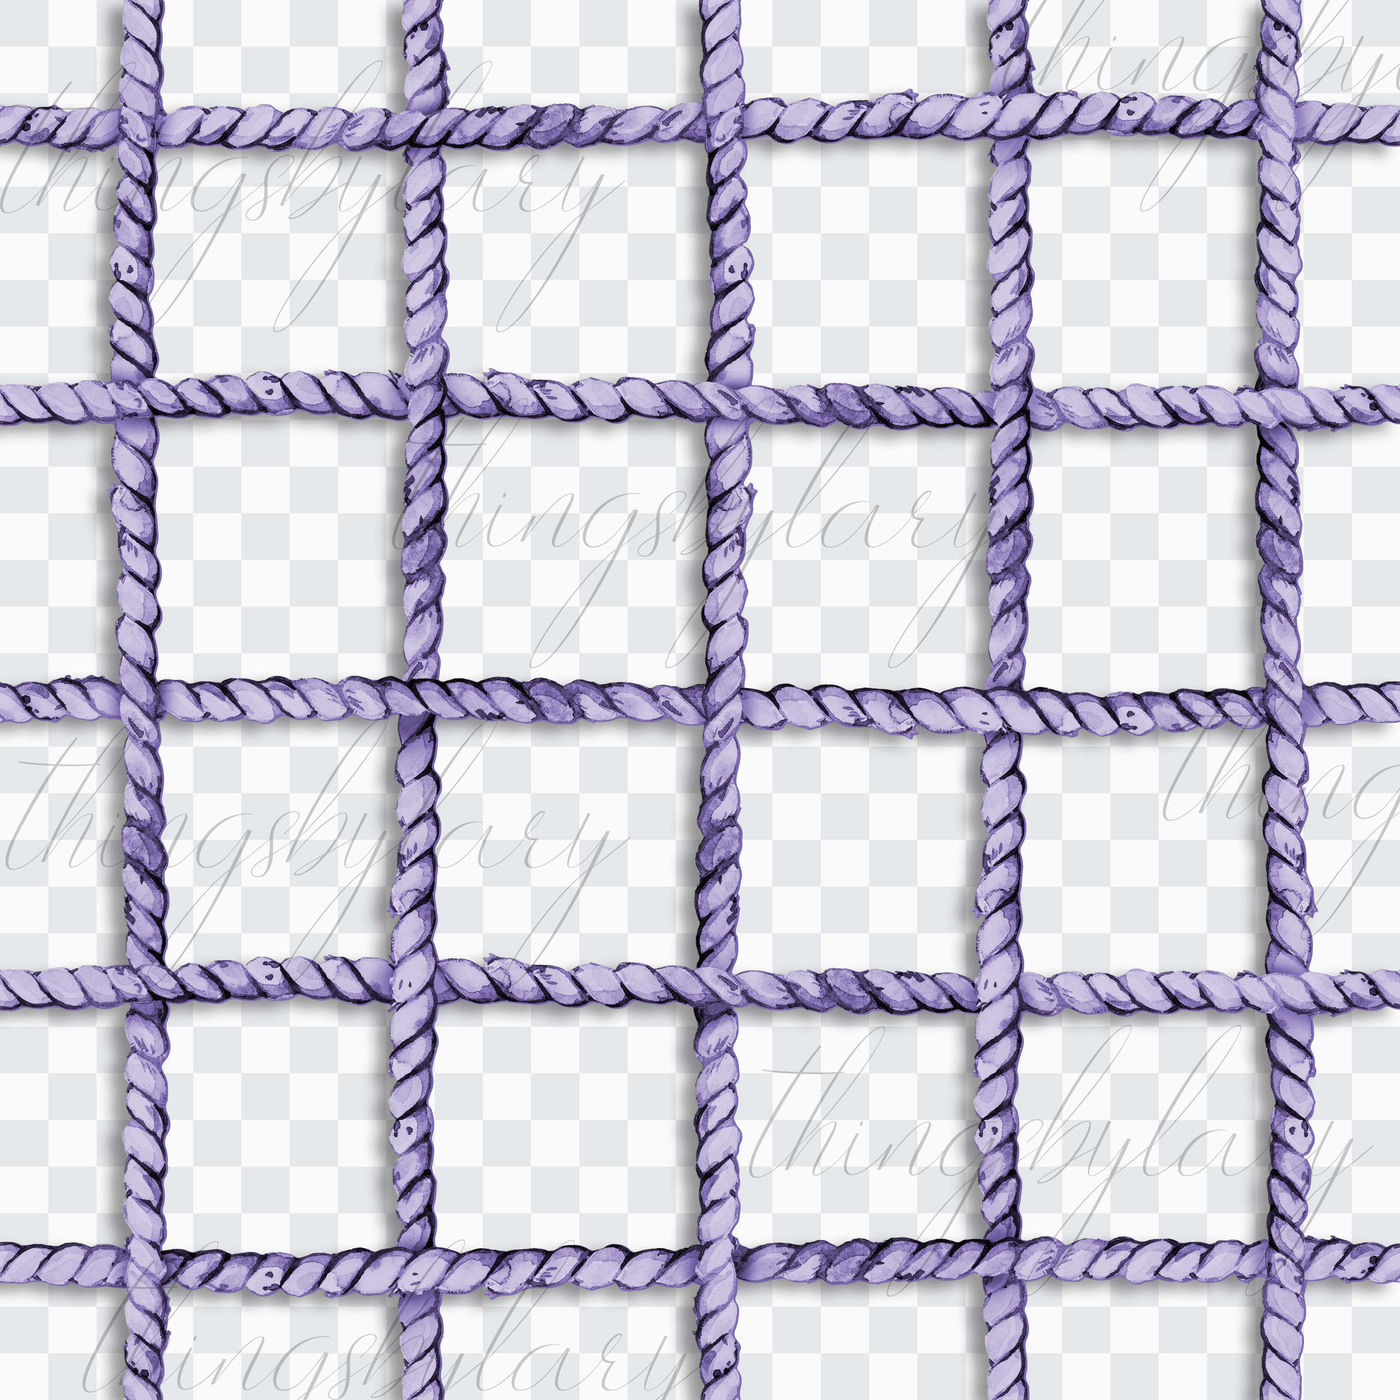 12 Seamless Rope Net Overlay Transparent PNG Images By ArtInsider